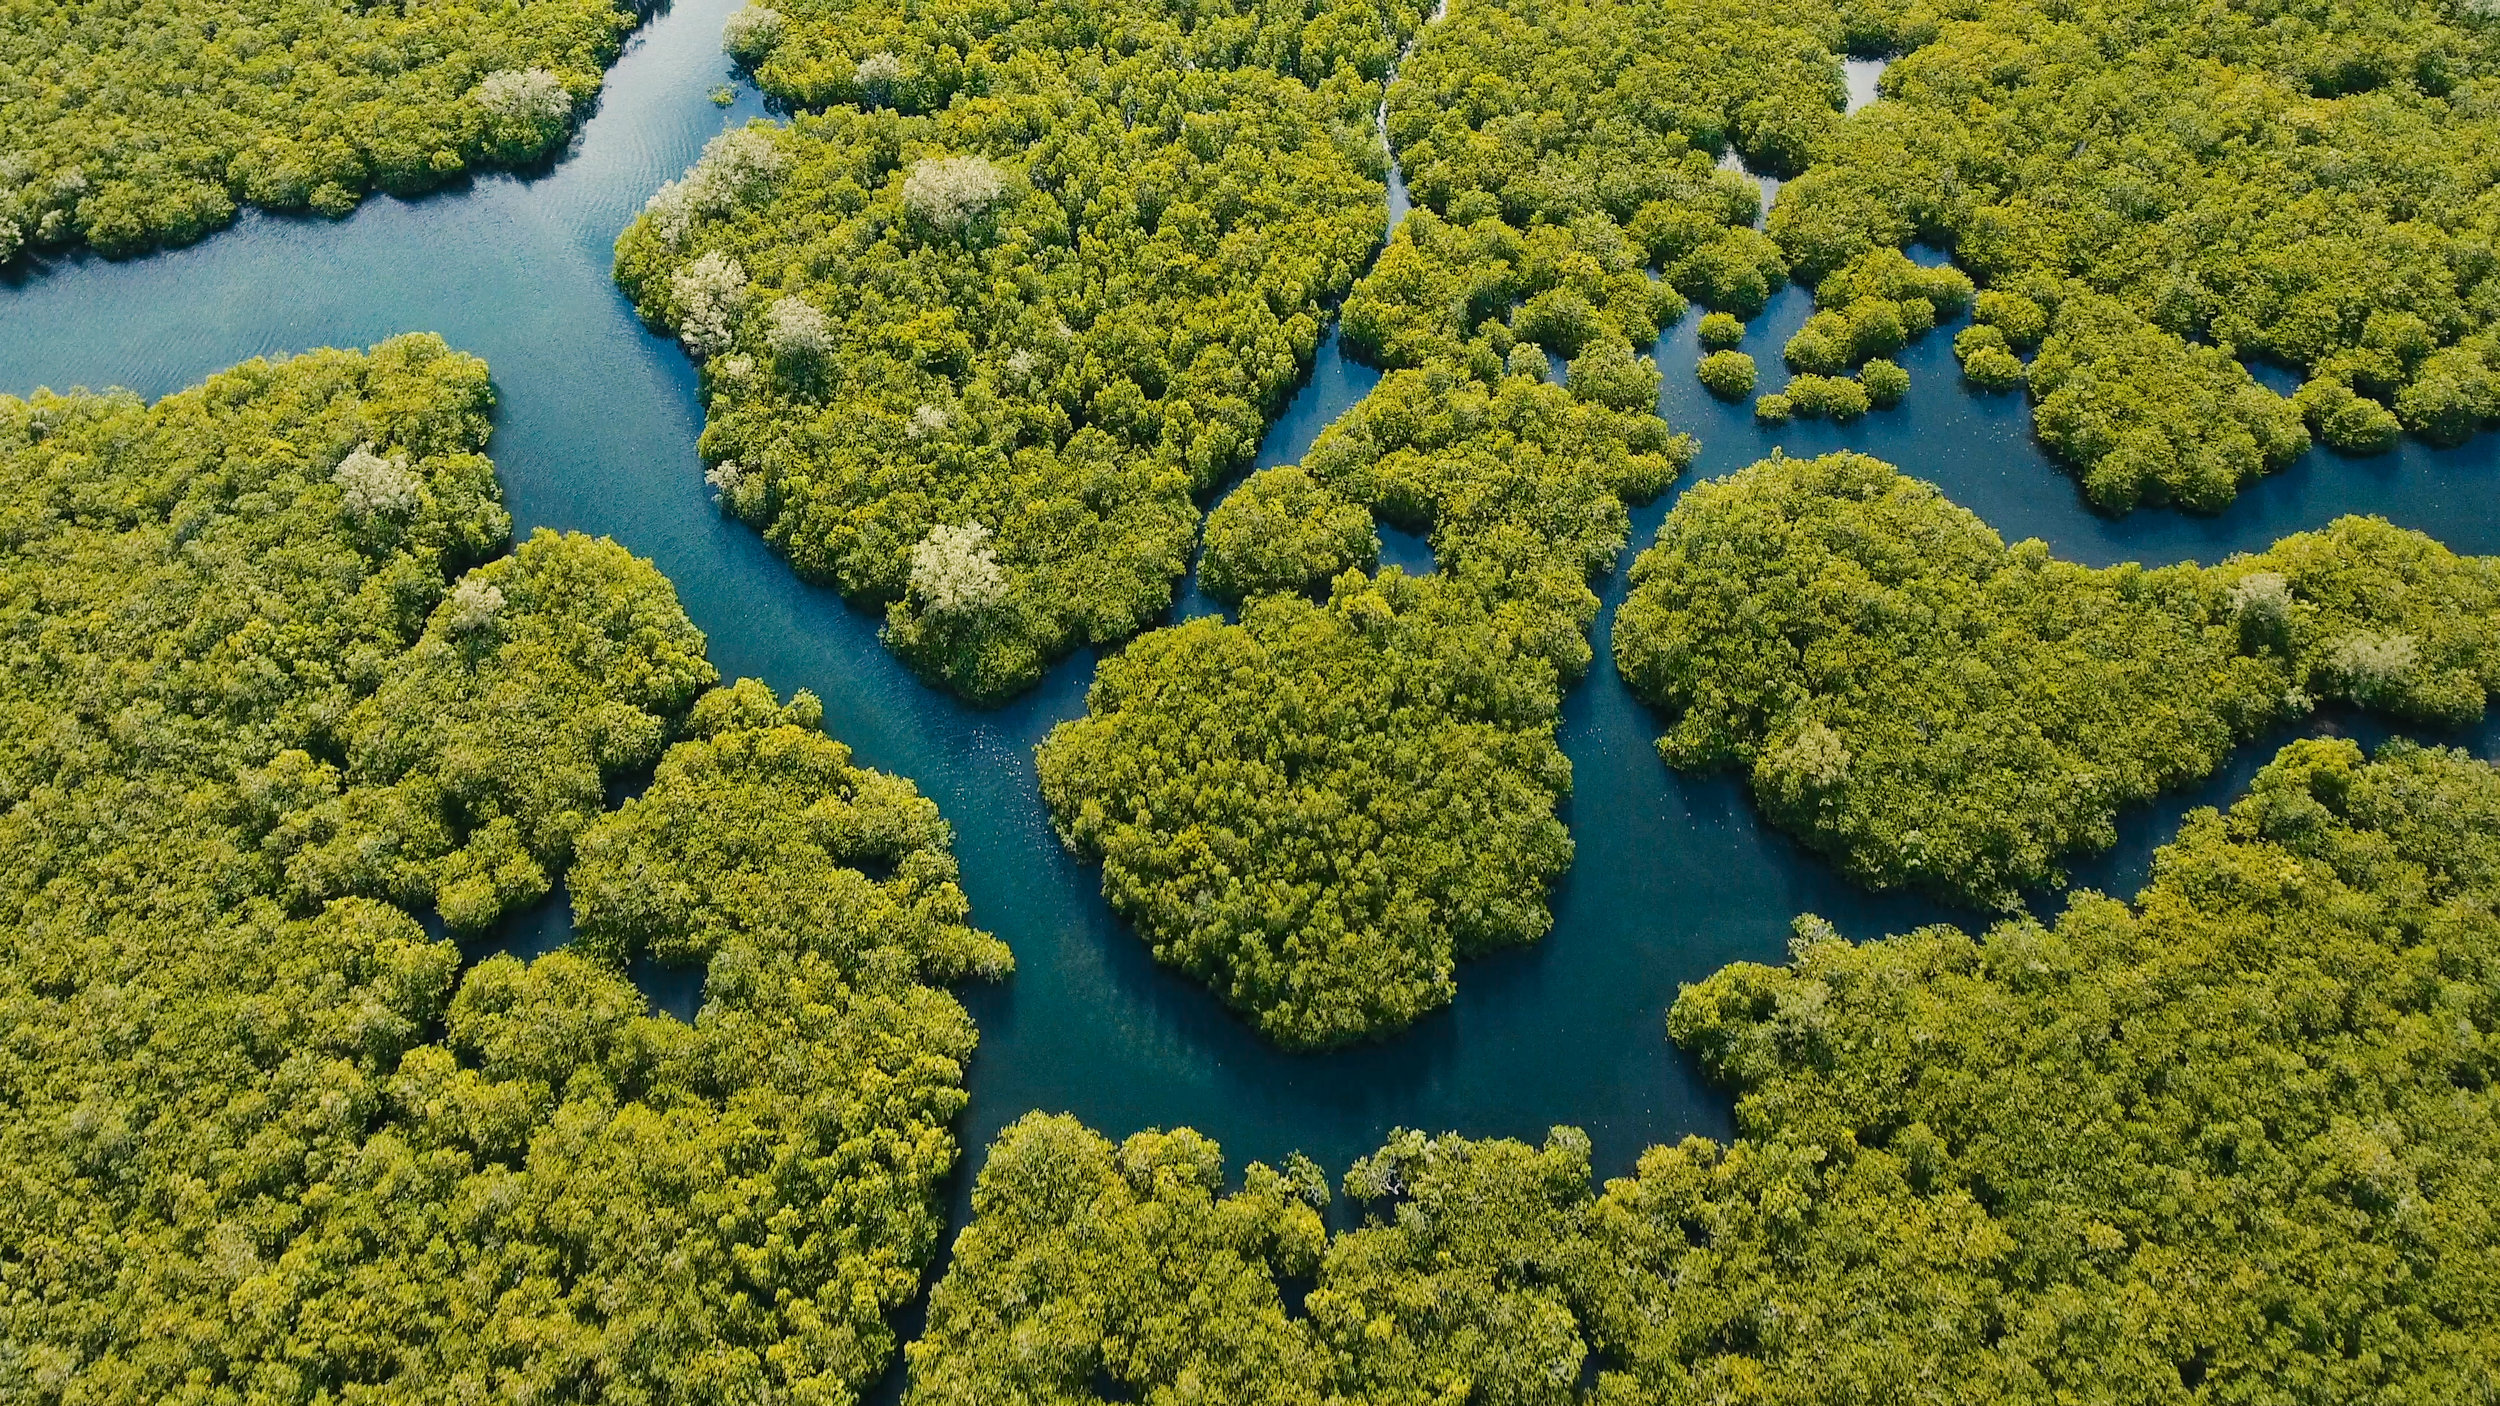 Pictured: Aerial view of mangrove forest and river on the Siargao island, Philippines.